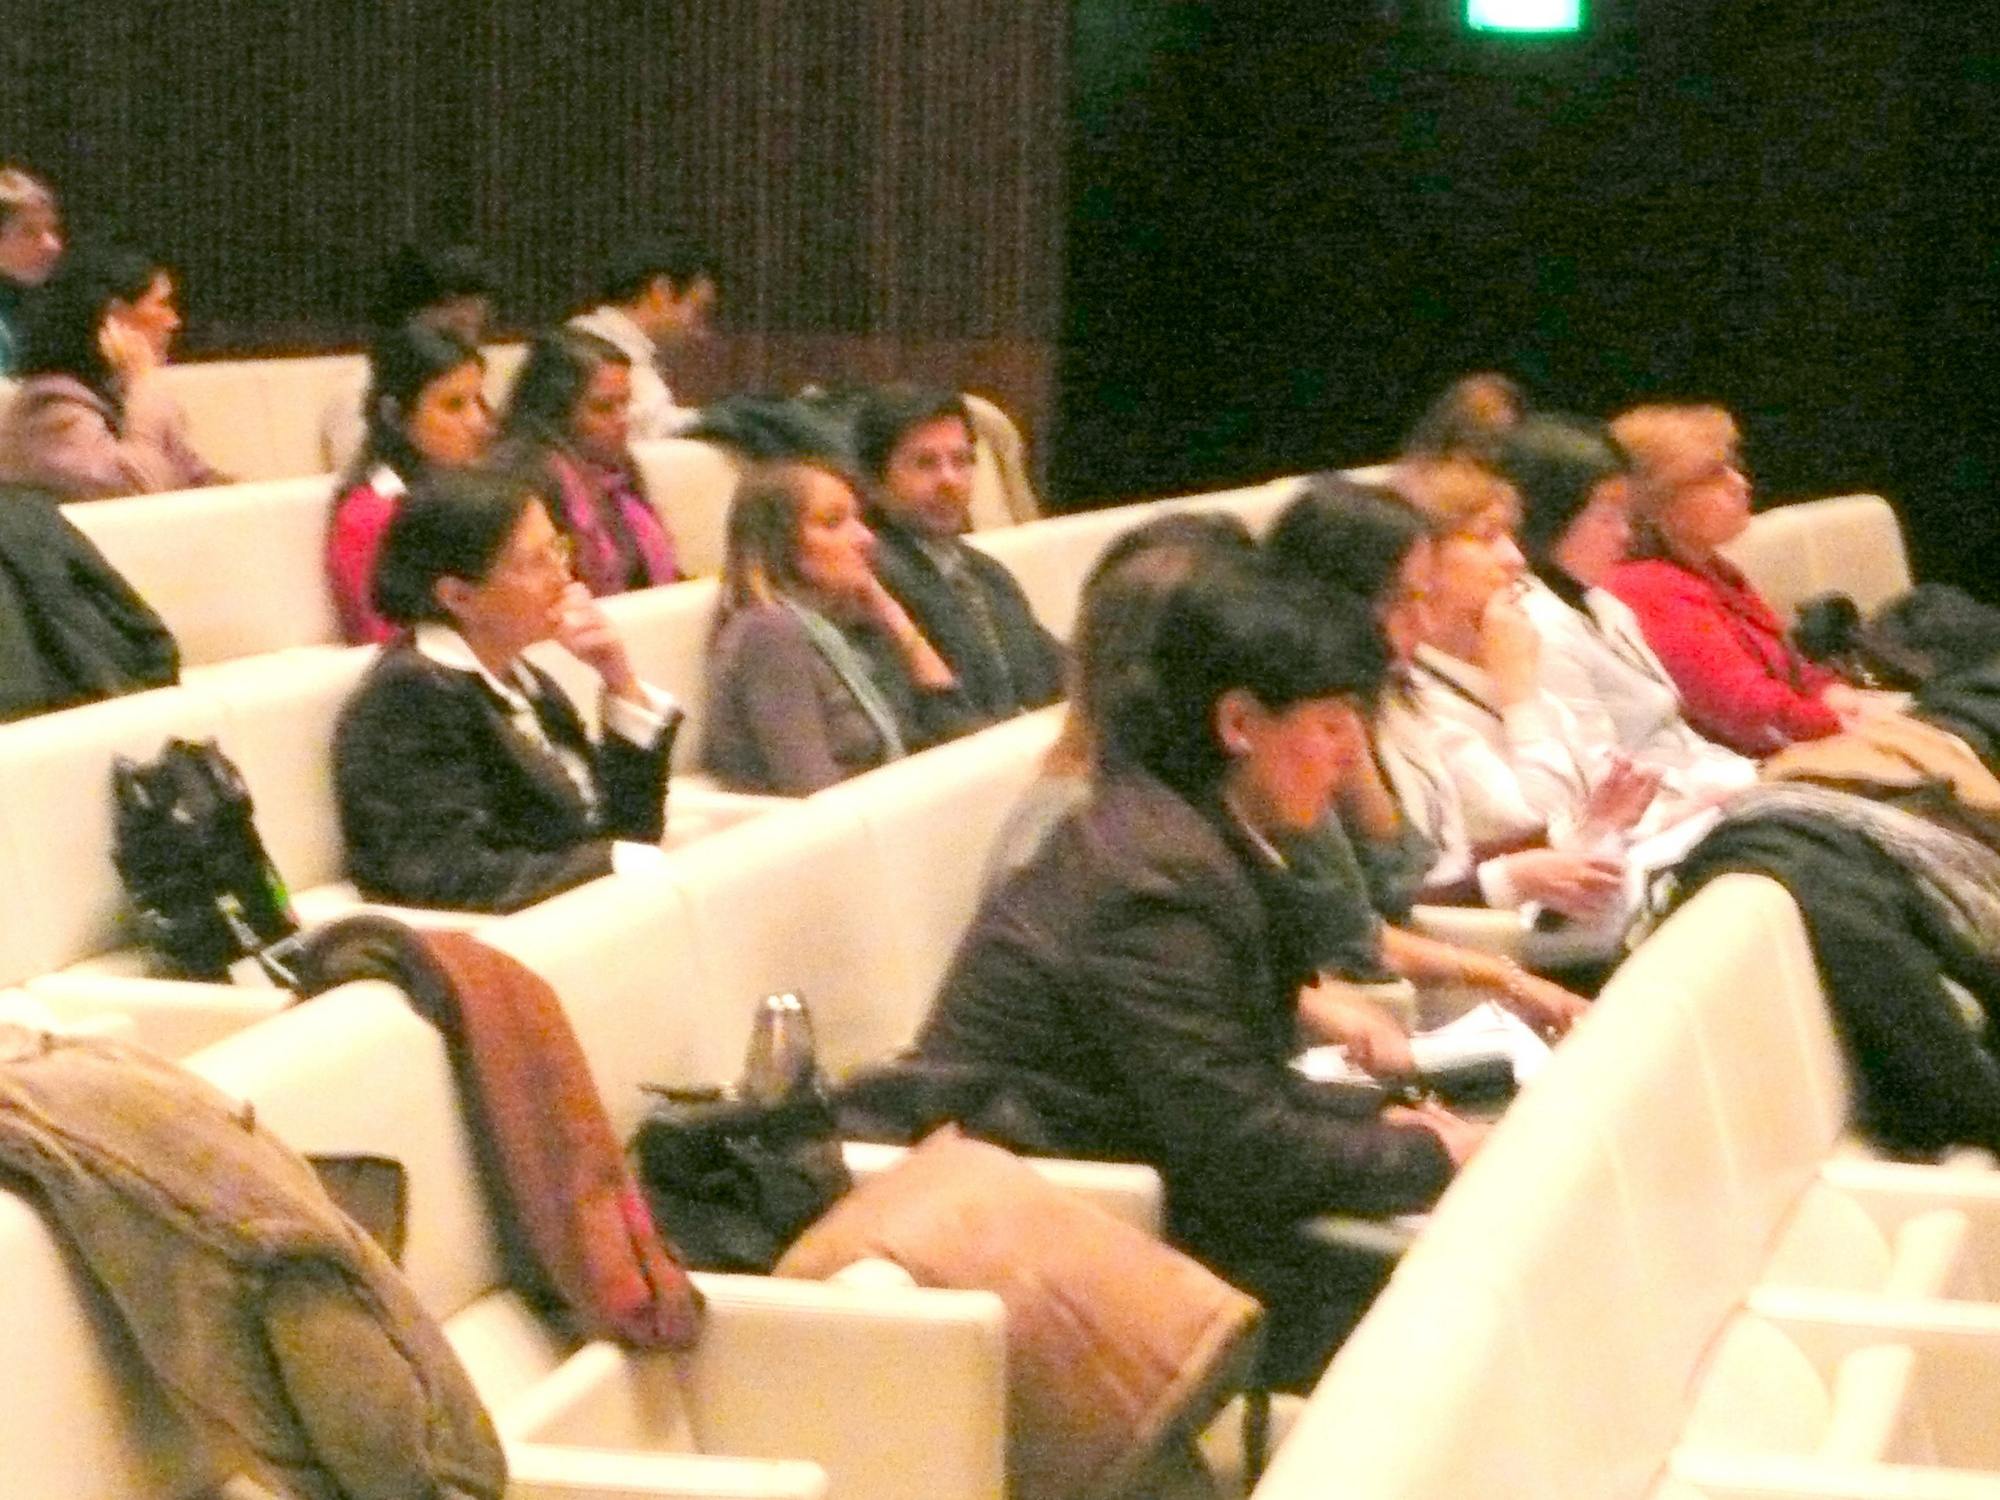 Participants during the Congress 1 2010